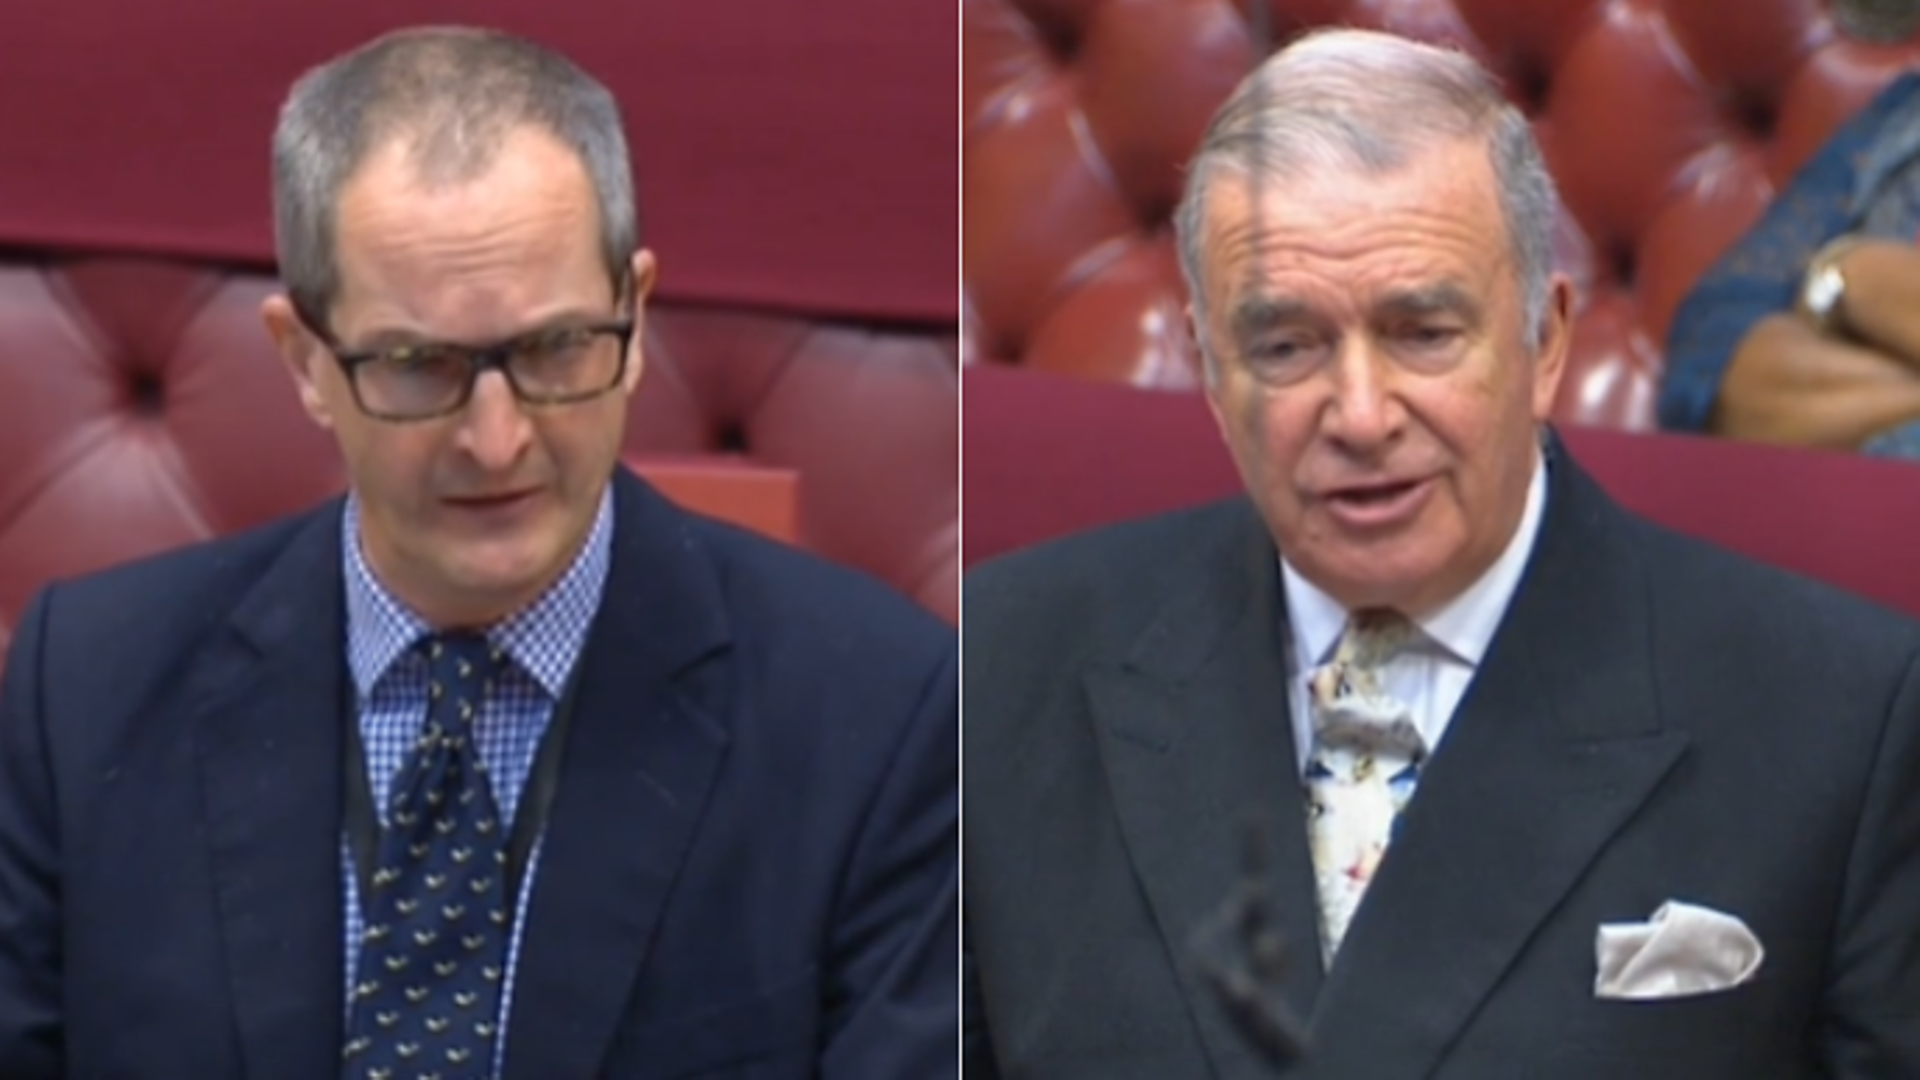 Government minister Lord Bethell and Labour peer Lord West in the House of Lords - Credit: Parliament Live